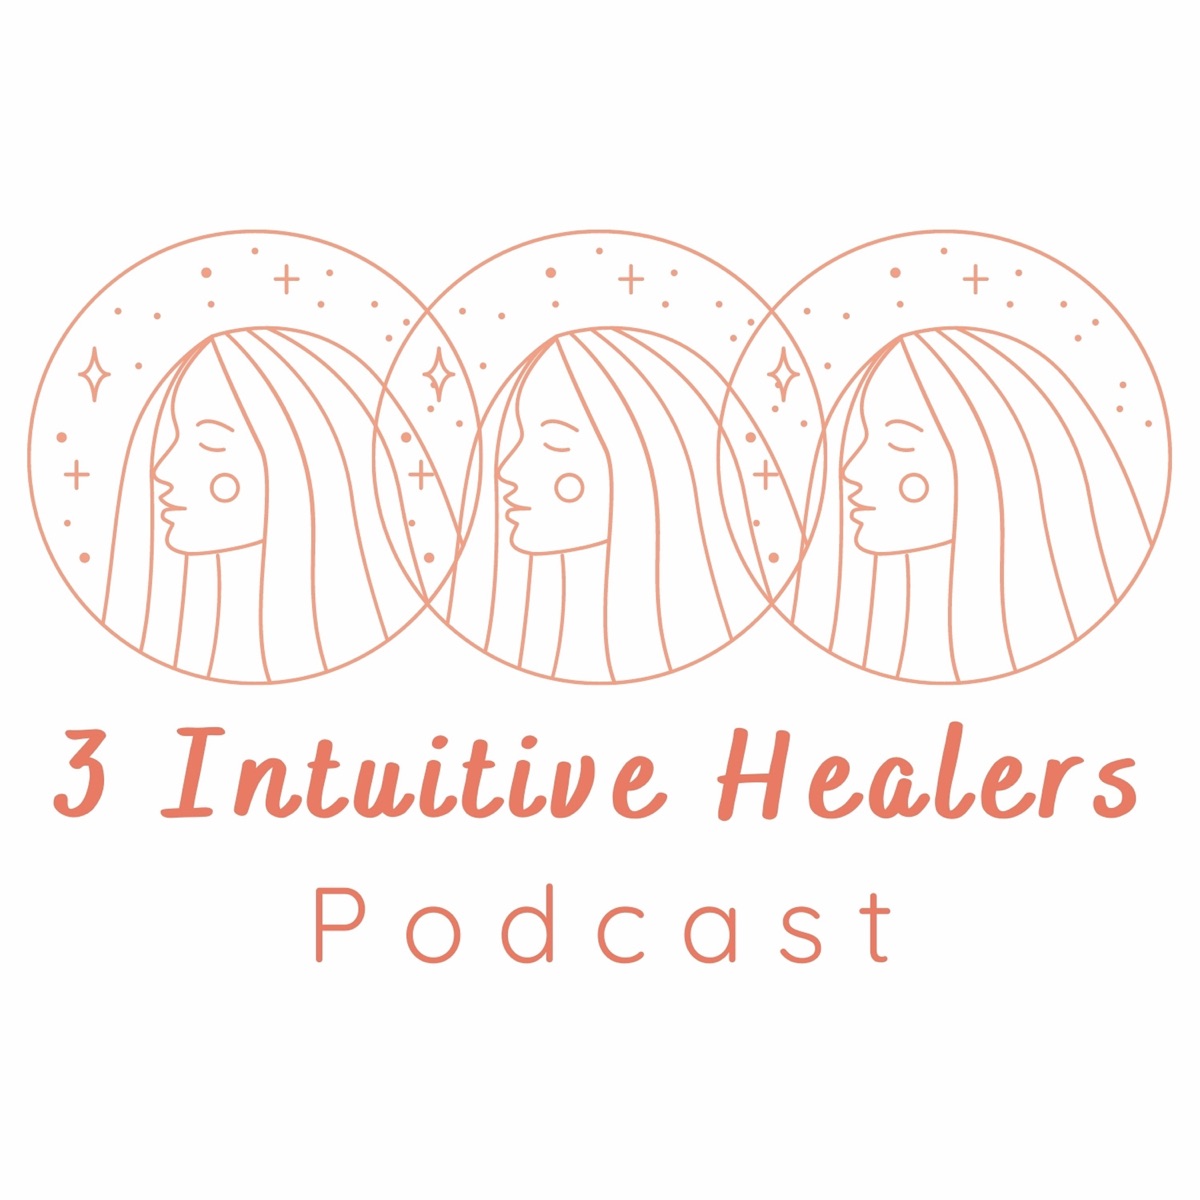 3 Intuitive Healers – Podcast – Podtail